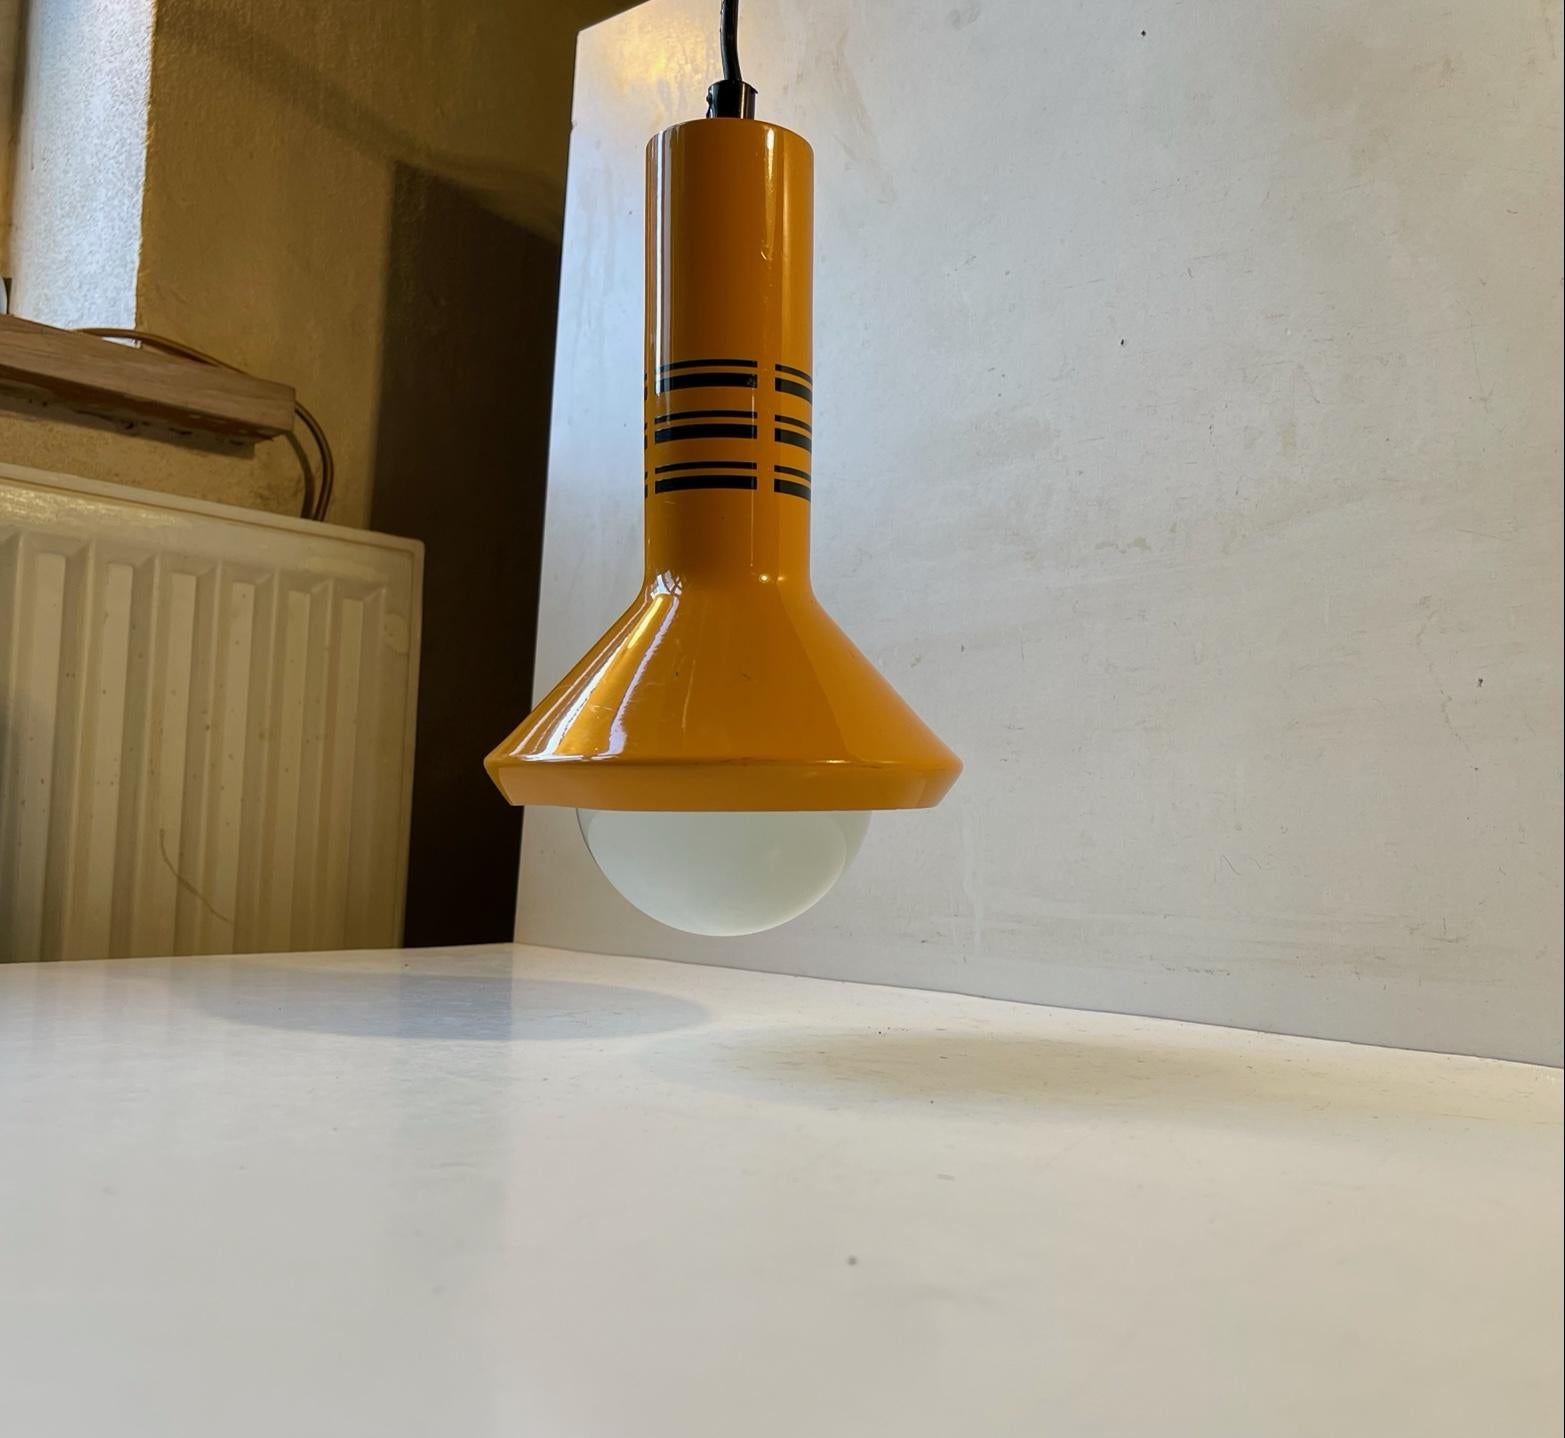 Orange aluminium pendant lamp with black graphics/stripes. Designed and manufactured by LB Lyskær in Denmark during the 1970s. For looks it is mounted with a white jumbo bulb that is included in the sale. This lamp is NOS - New old stock and has